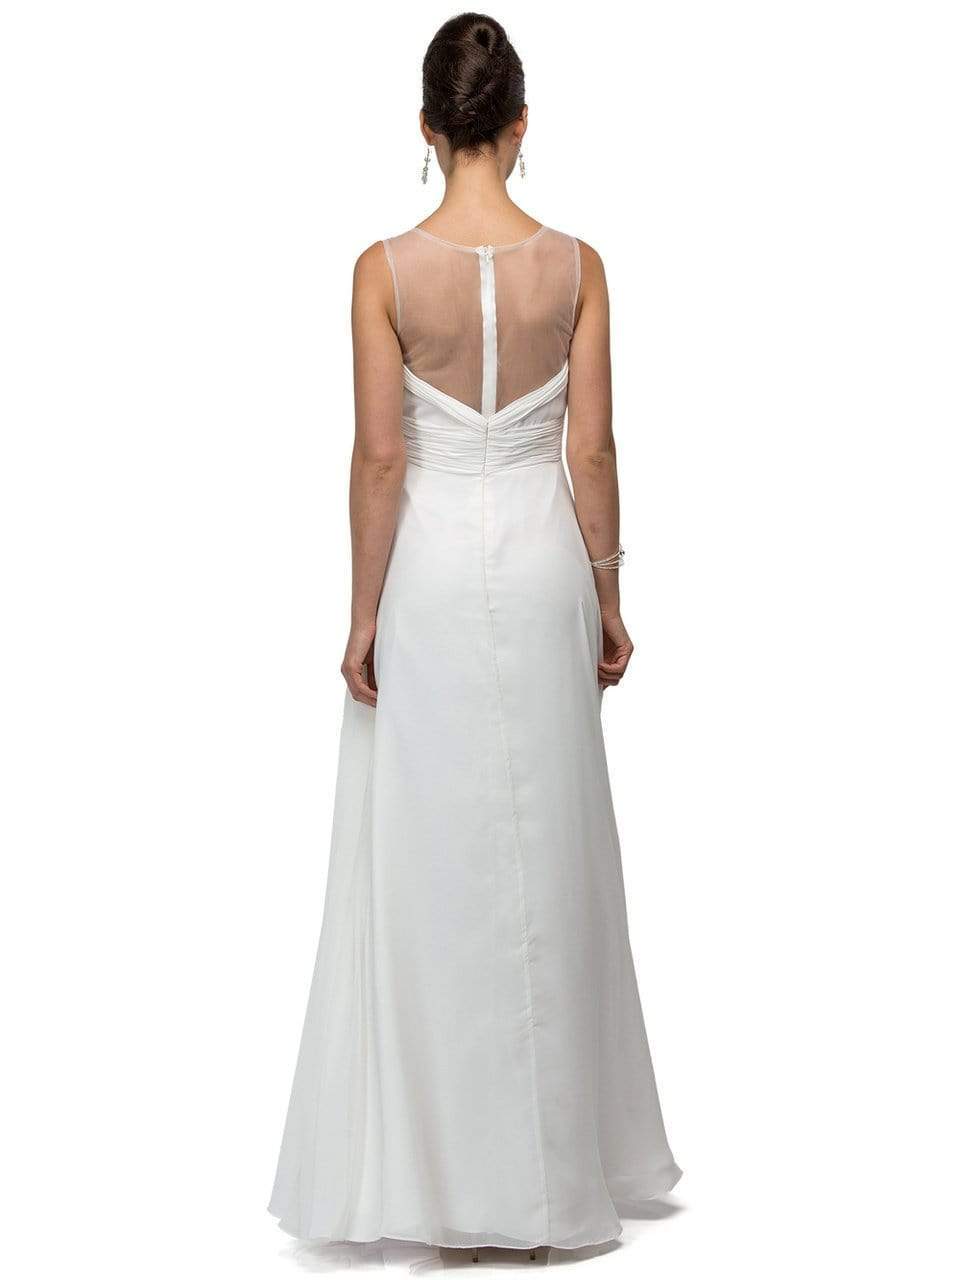 Dancing Queen Bridal - 9539 Sophisticated Ruched V-Neck Chiffon A-line Dress Wedding Dresses